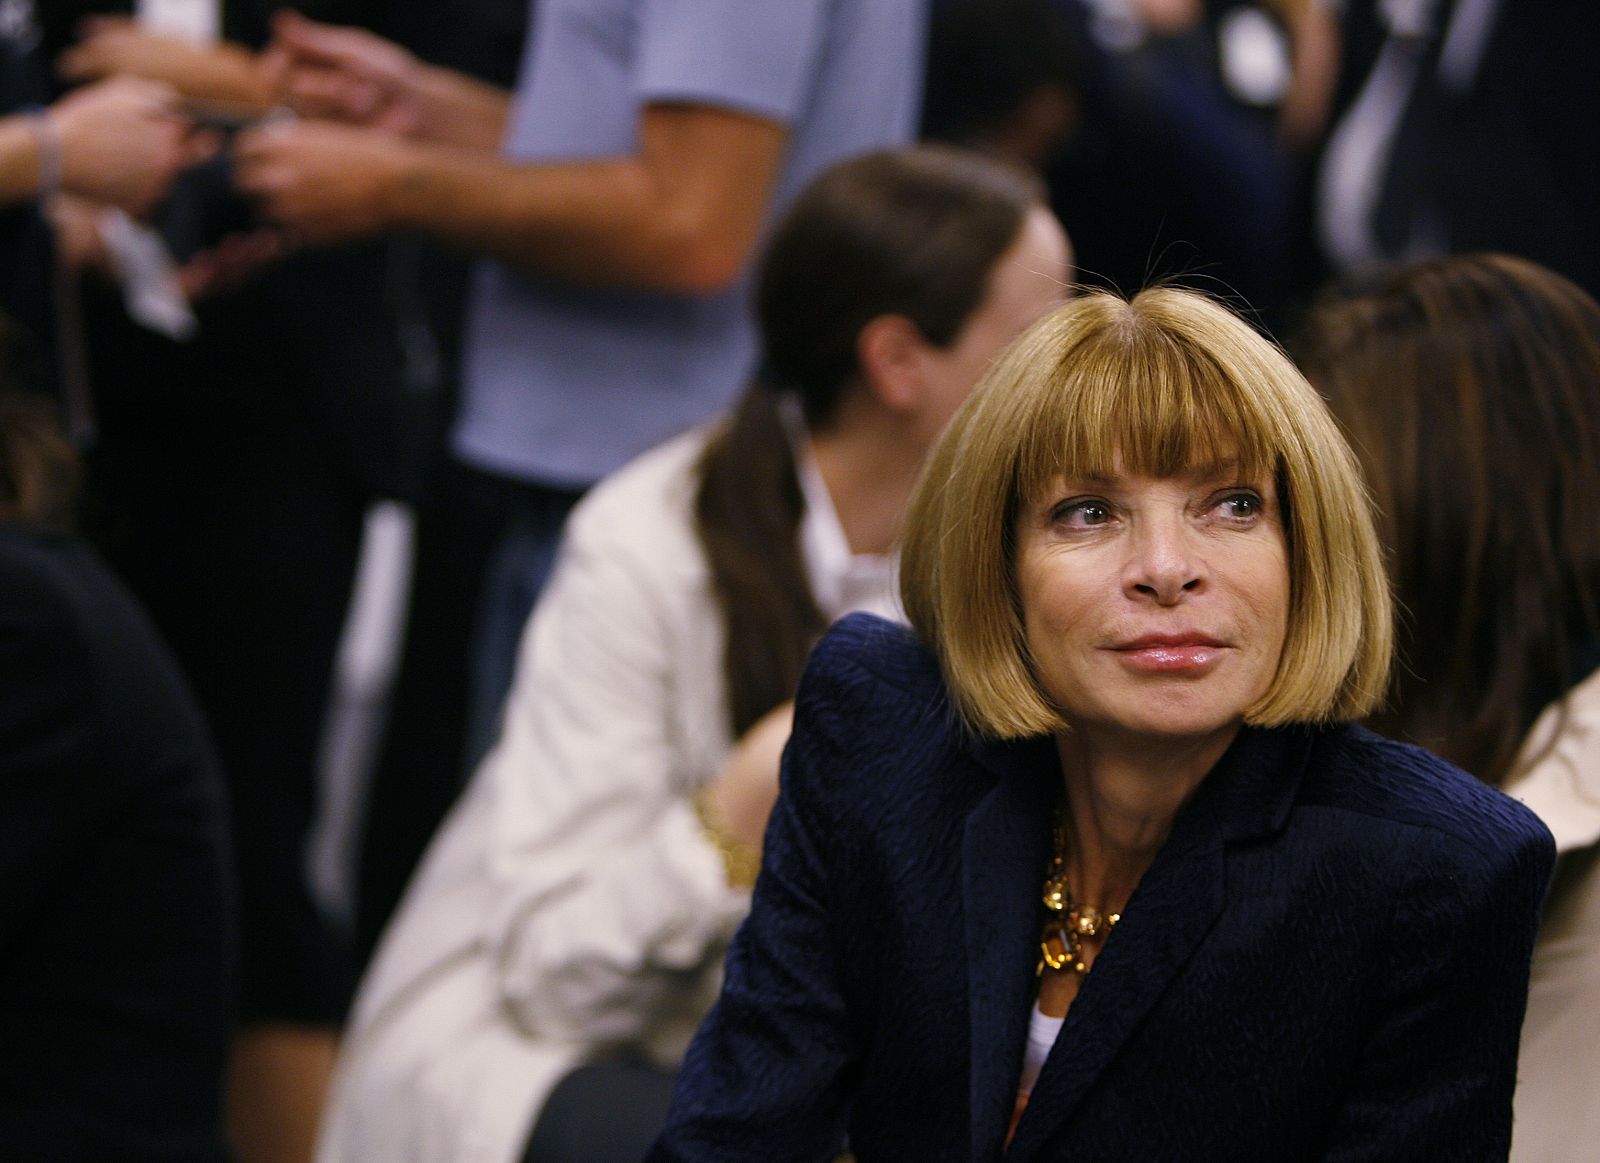 Vogue editor Anna Wintour waits for the start of the Calvin Klein Spring 2010 show during New York Fashion Week